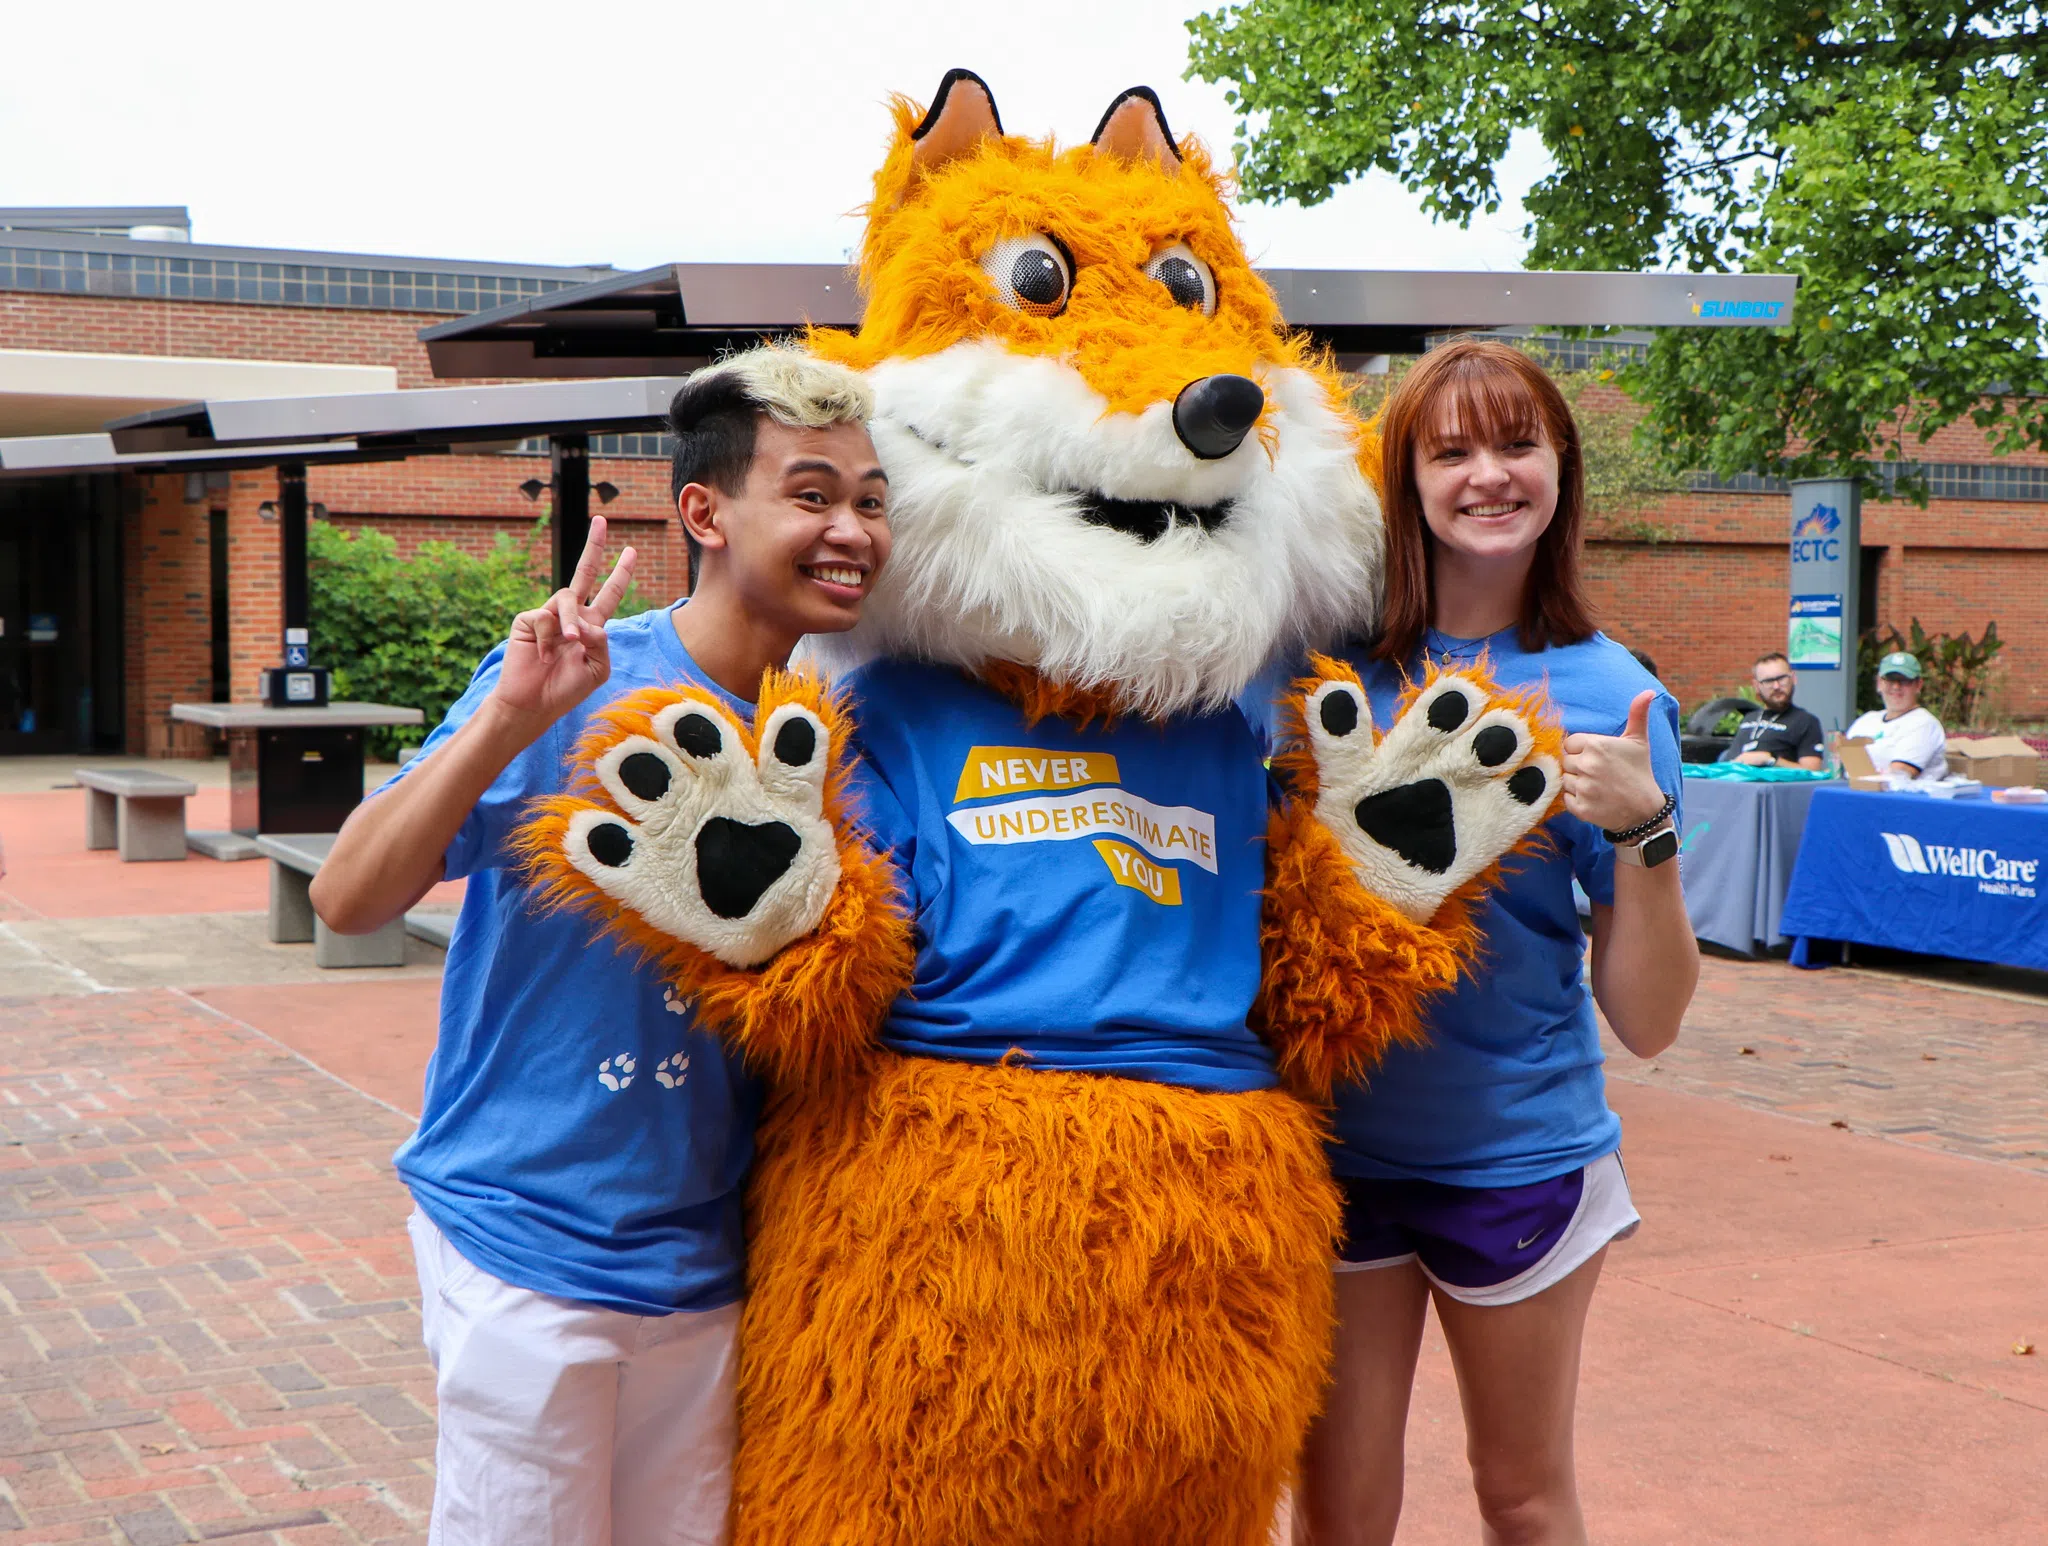 ECTC's mascot Pathfinder gives a thumbs up with his friends.